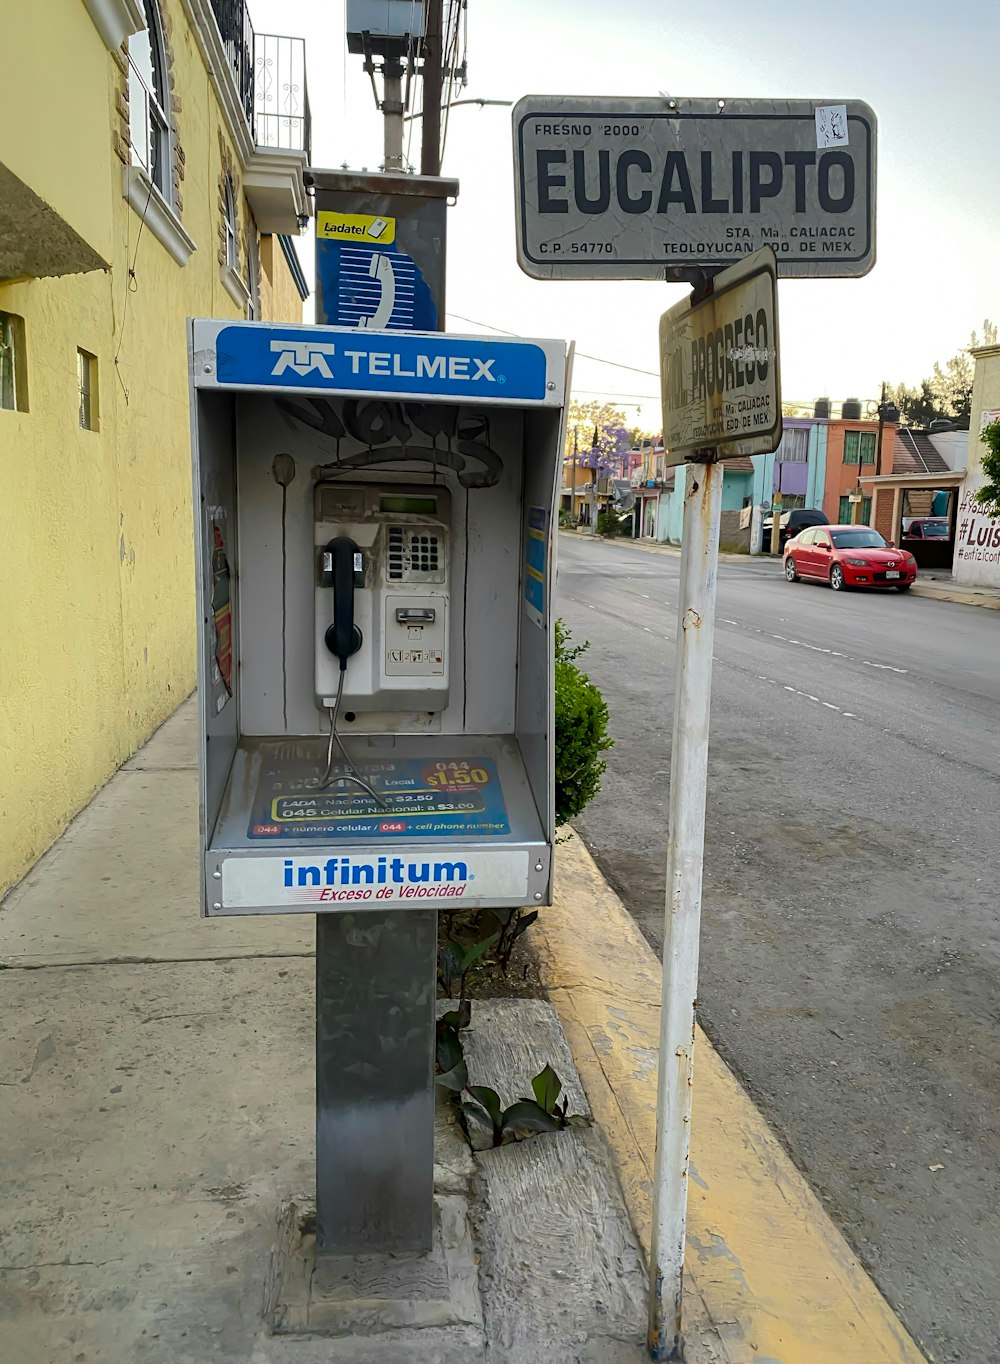 an old fashioned pay phone on the side of the street